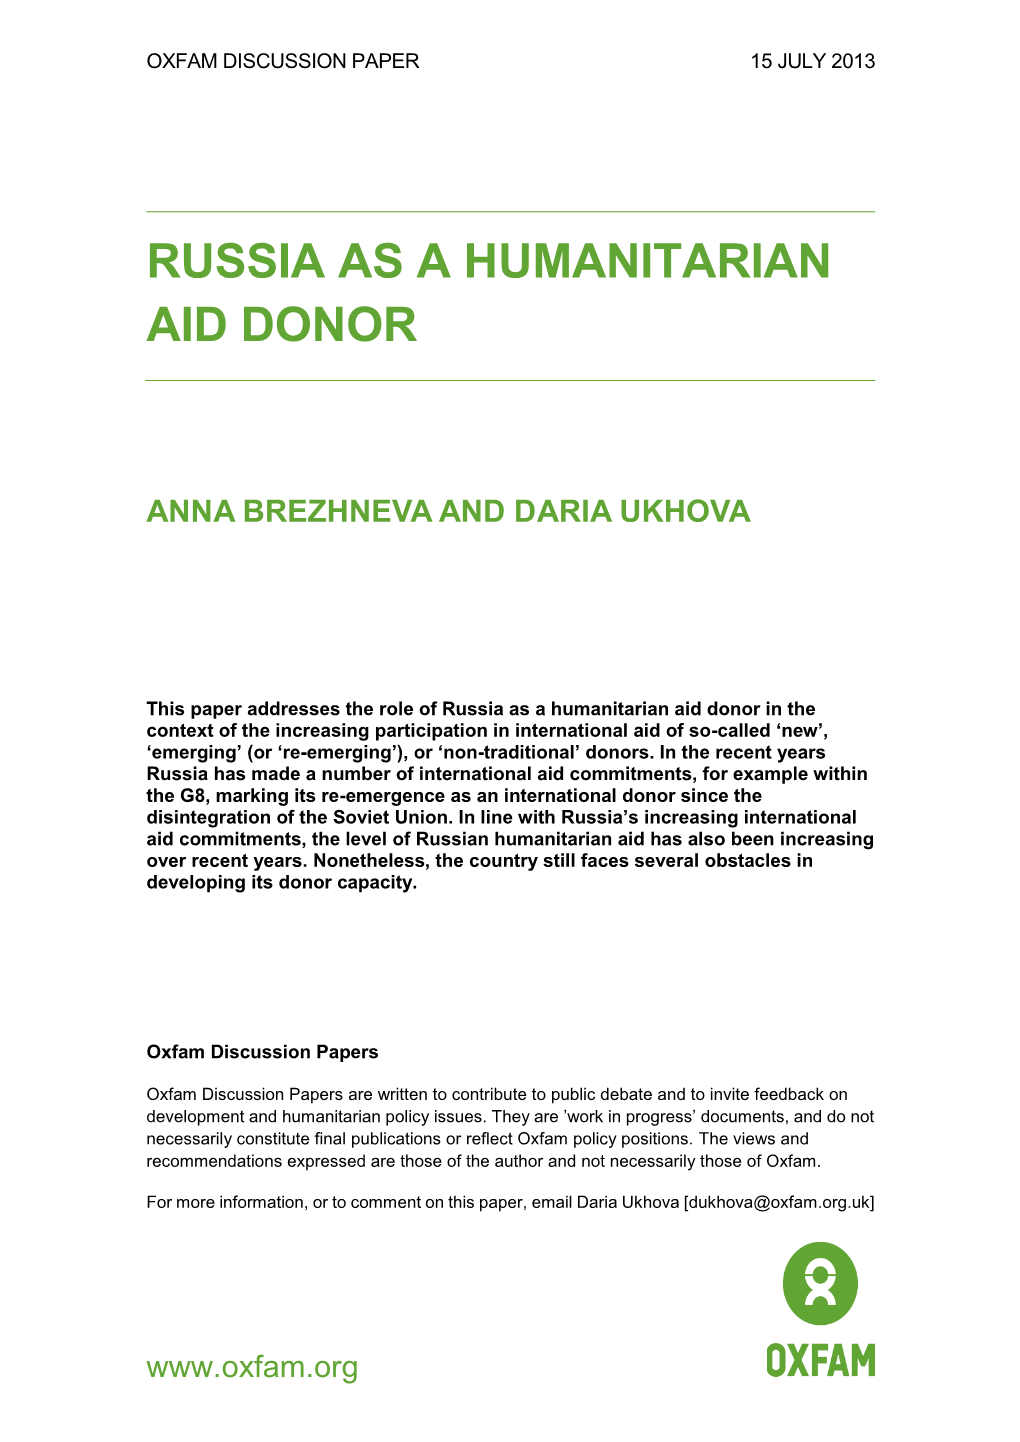 Russia As a Humanitarian Aid Donor